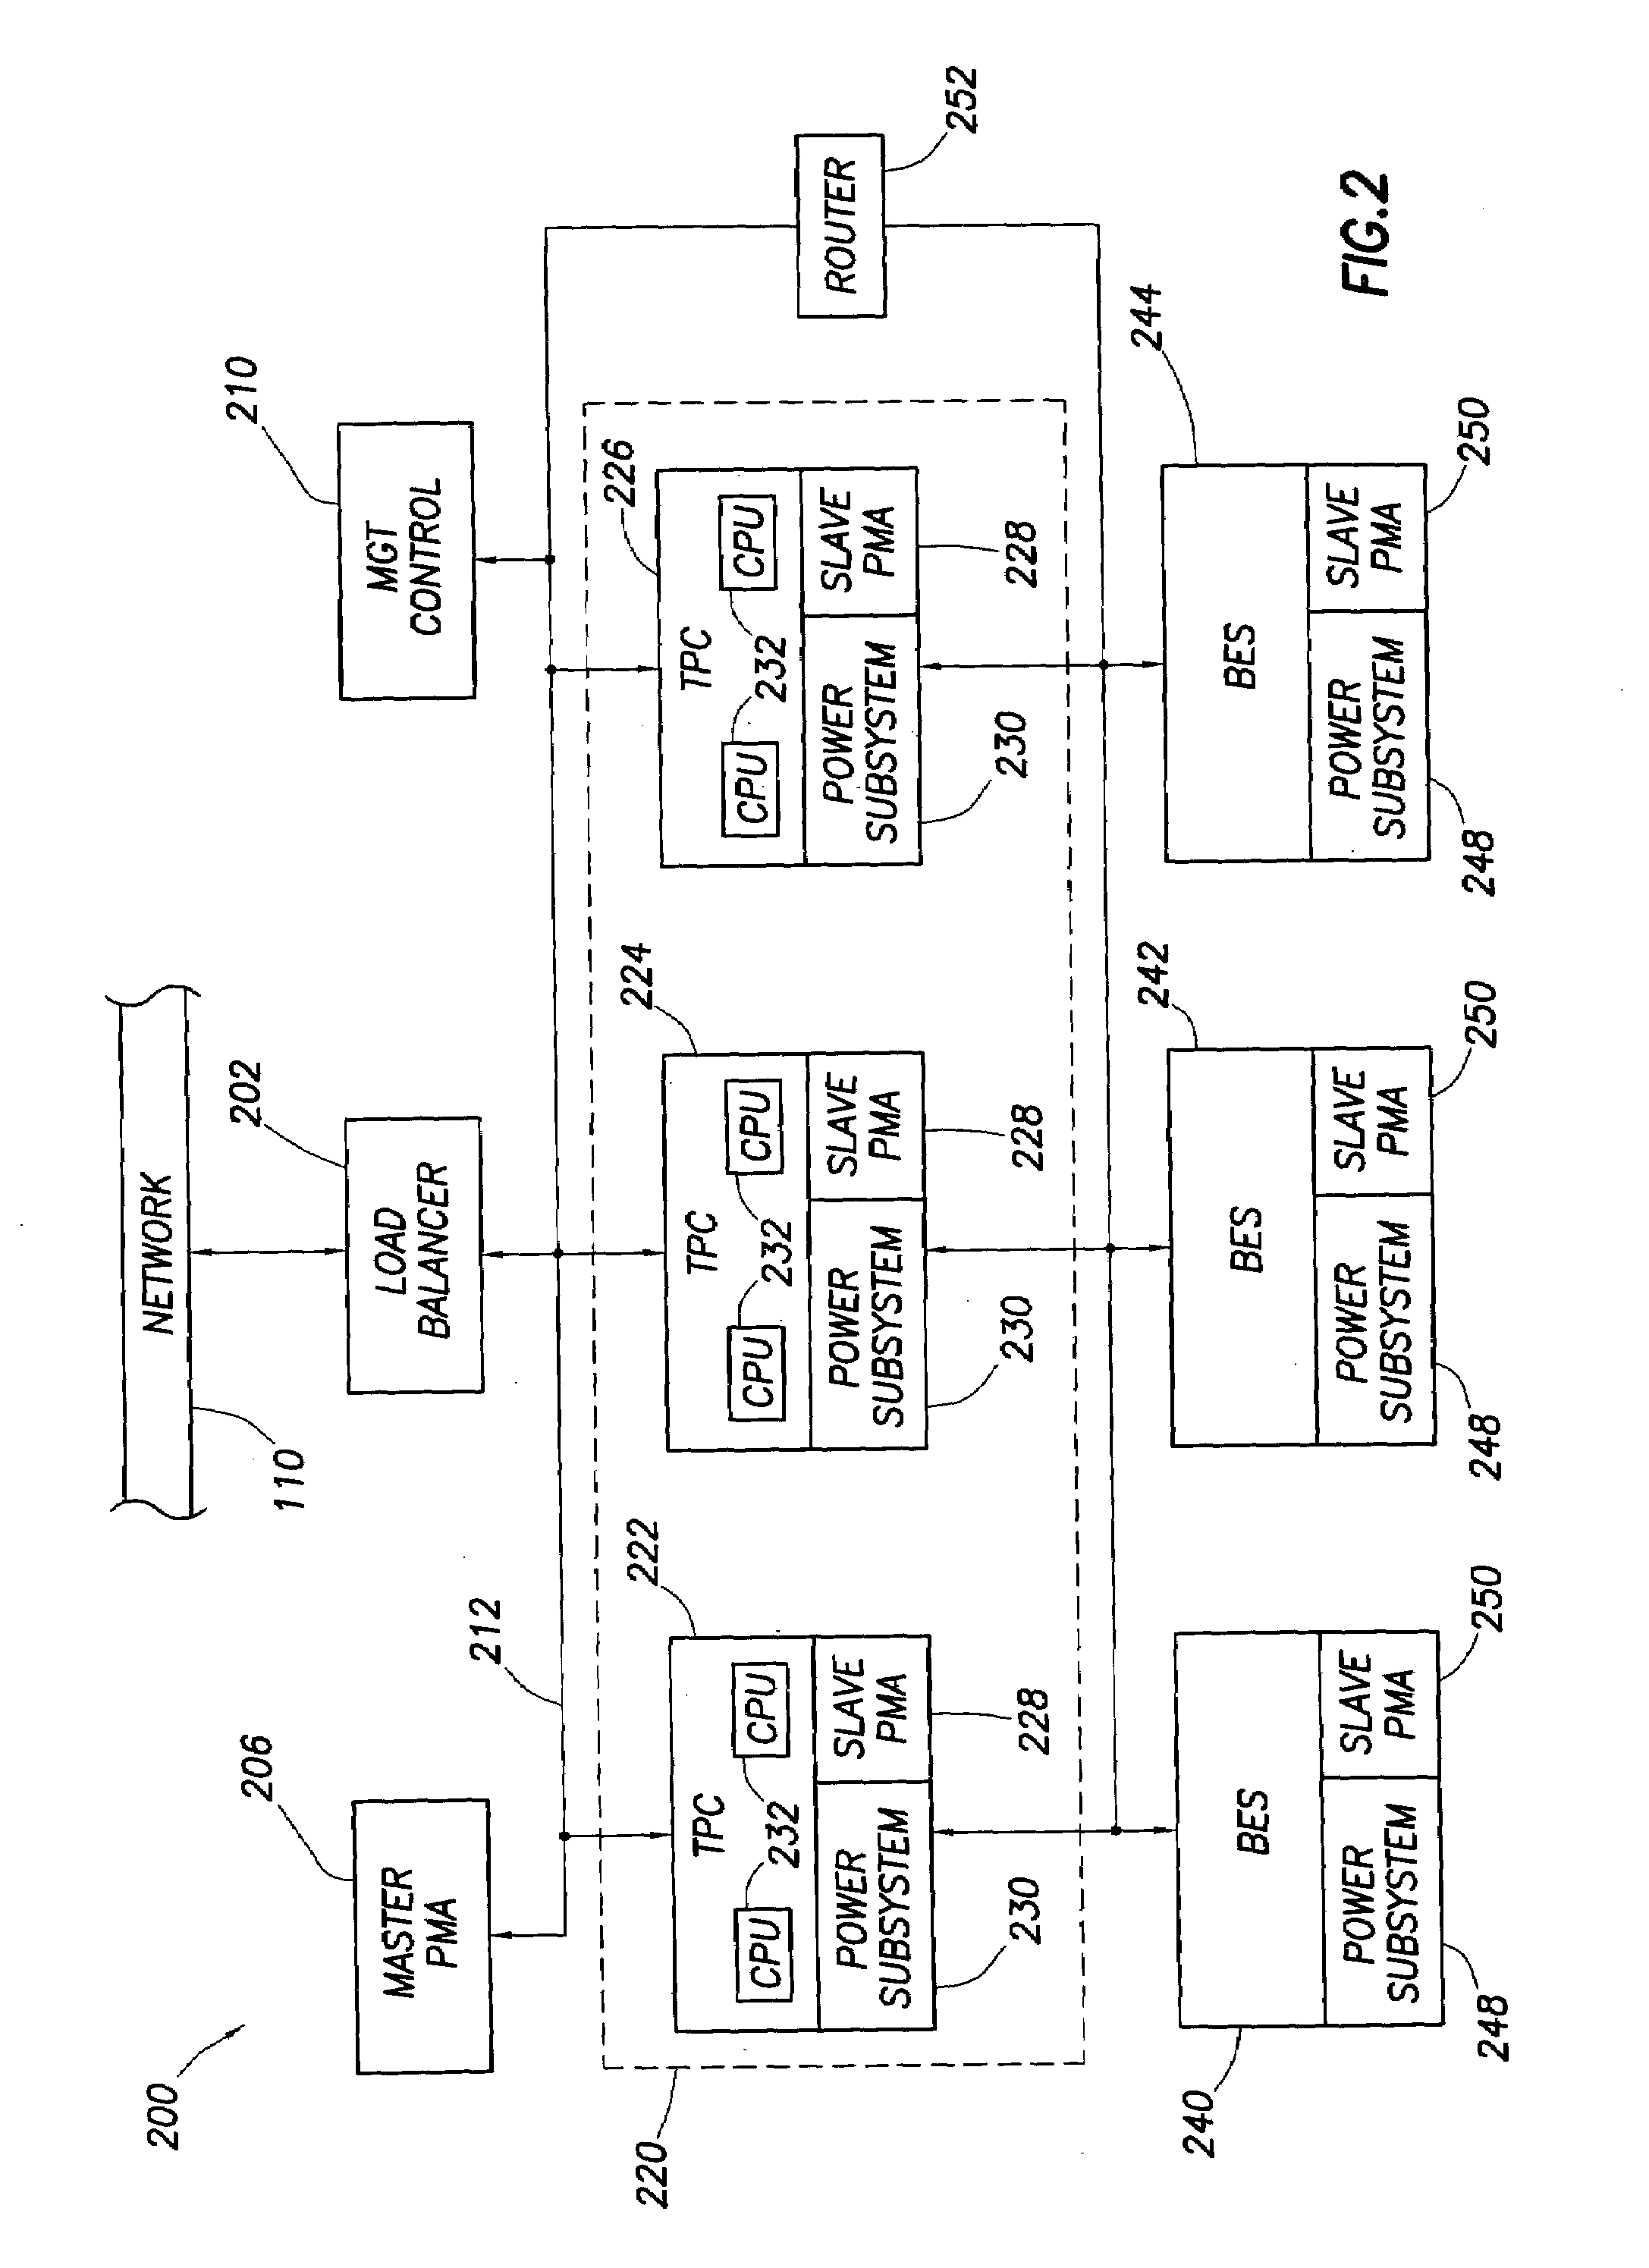 Automated power management system for a network of computers